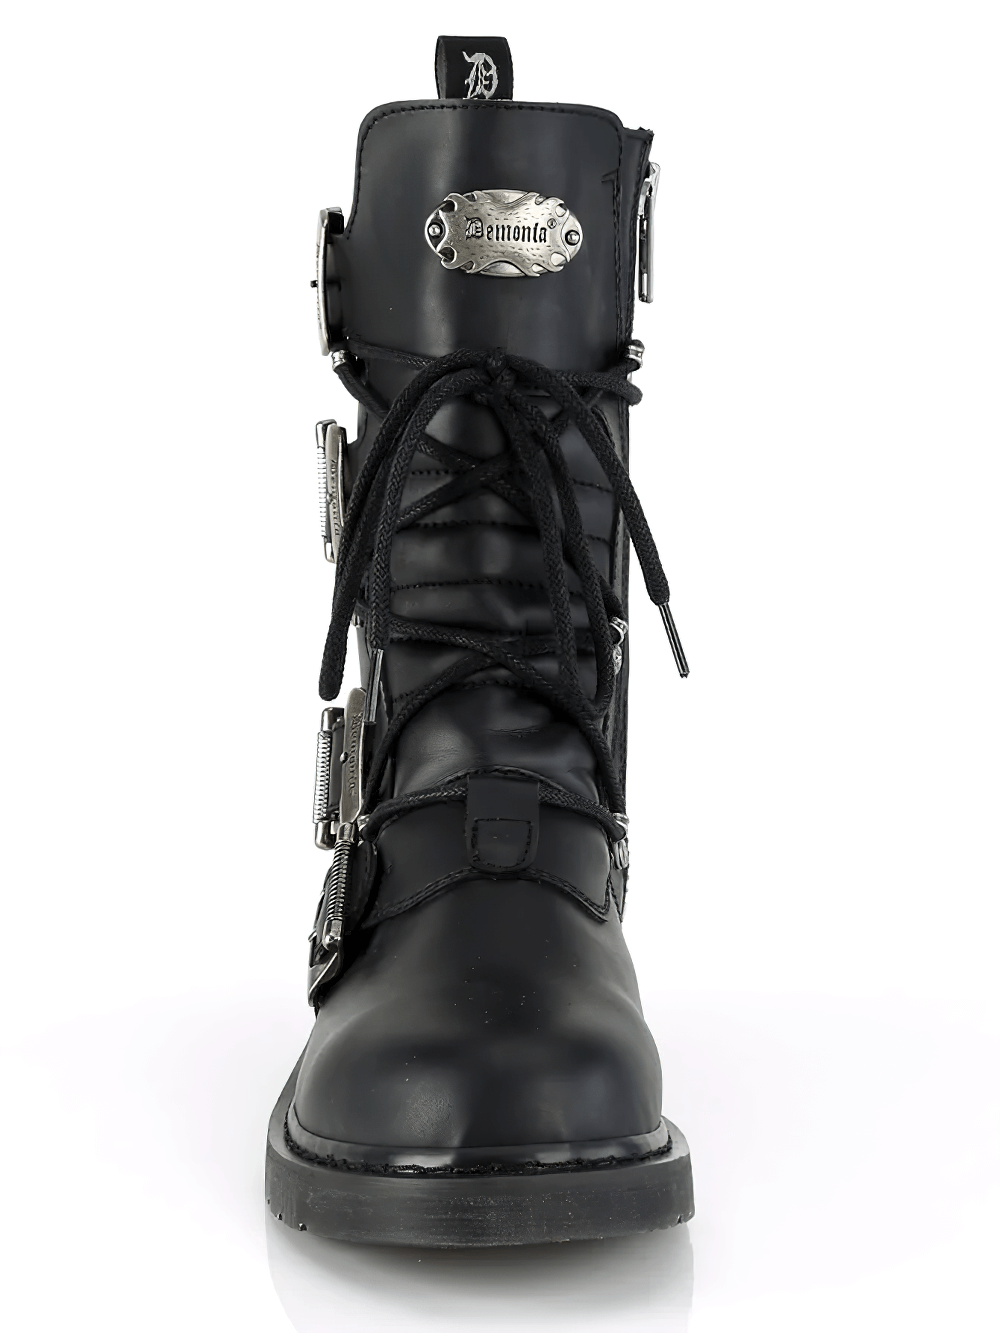 DEMONIA Unisex Boots with Lace-Up Front and Buckles